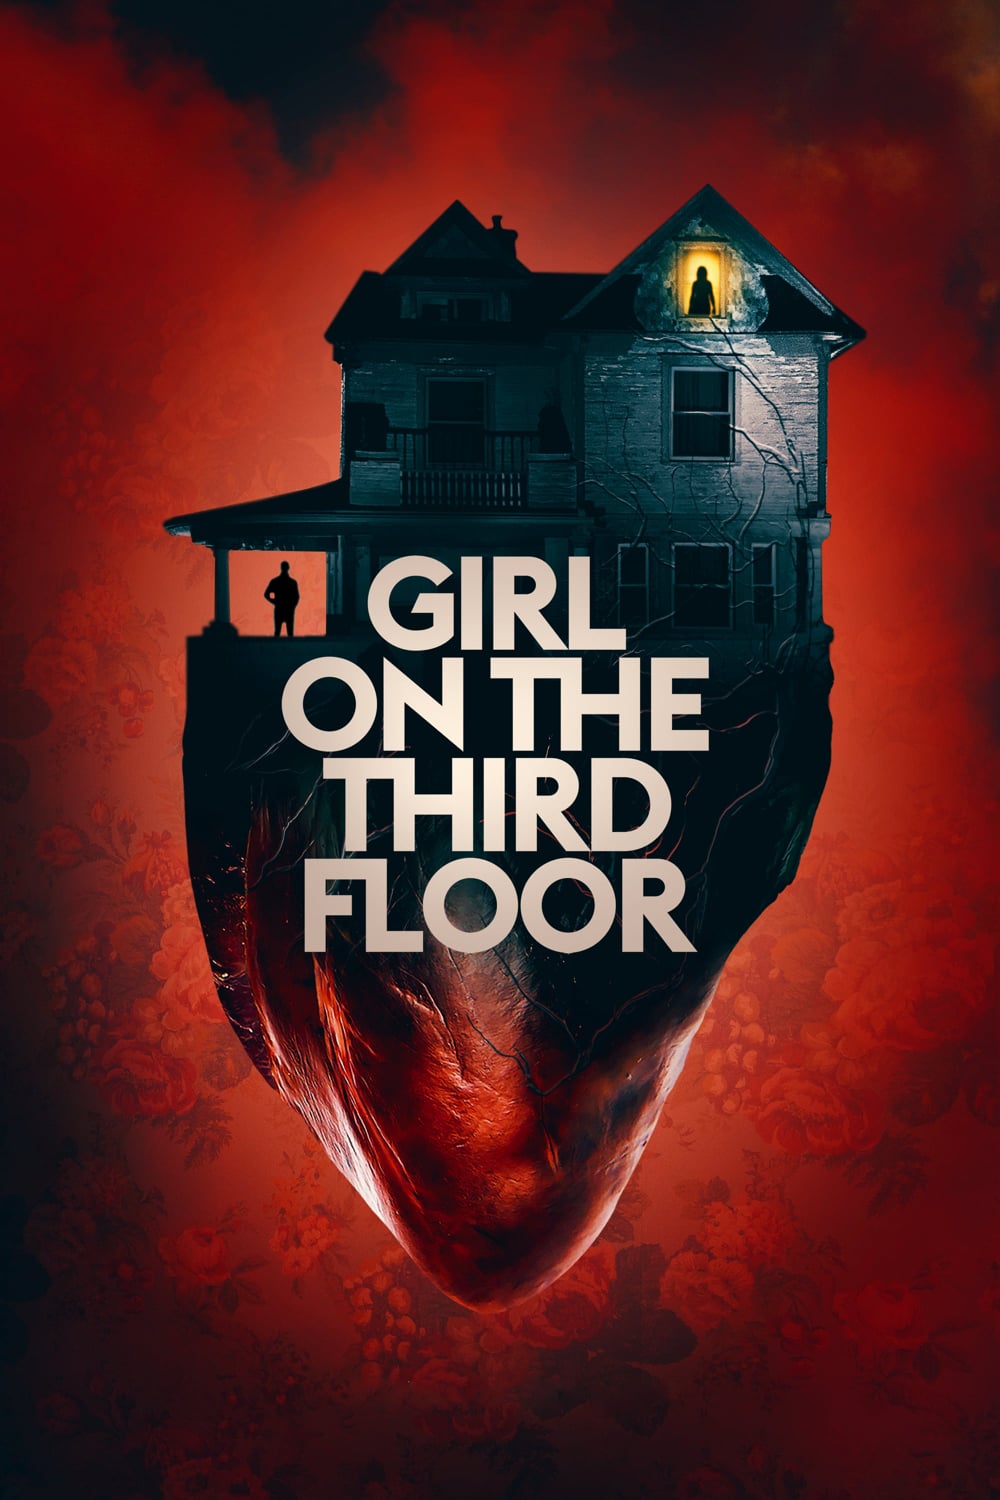 Poster for the movie "Girl on the Third Floor"